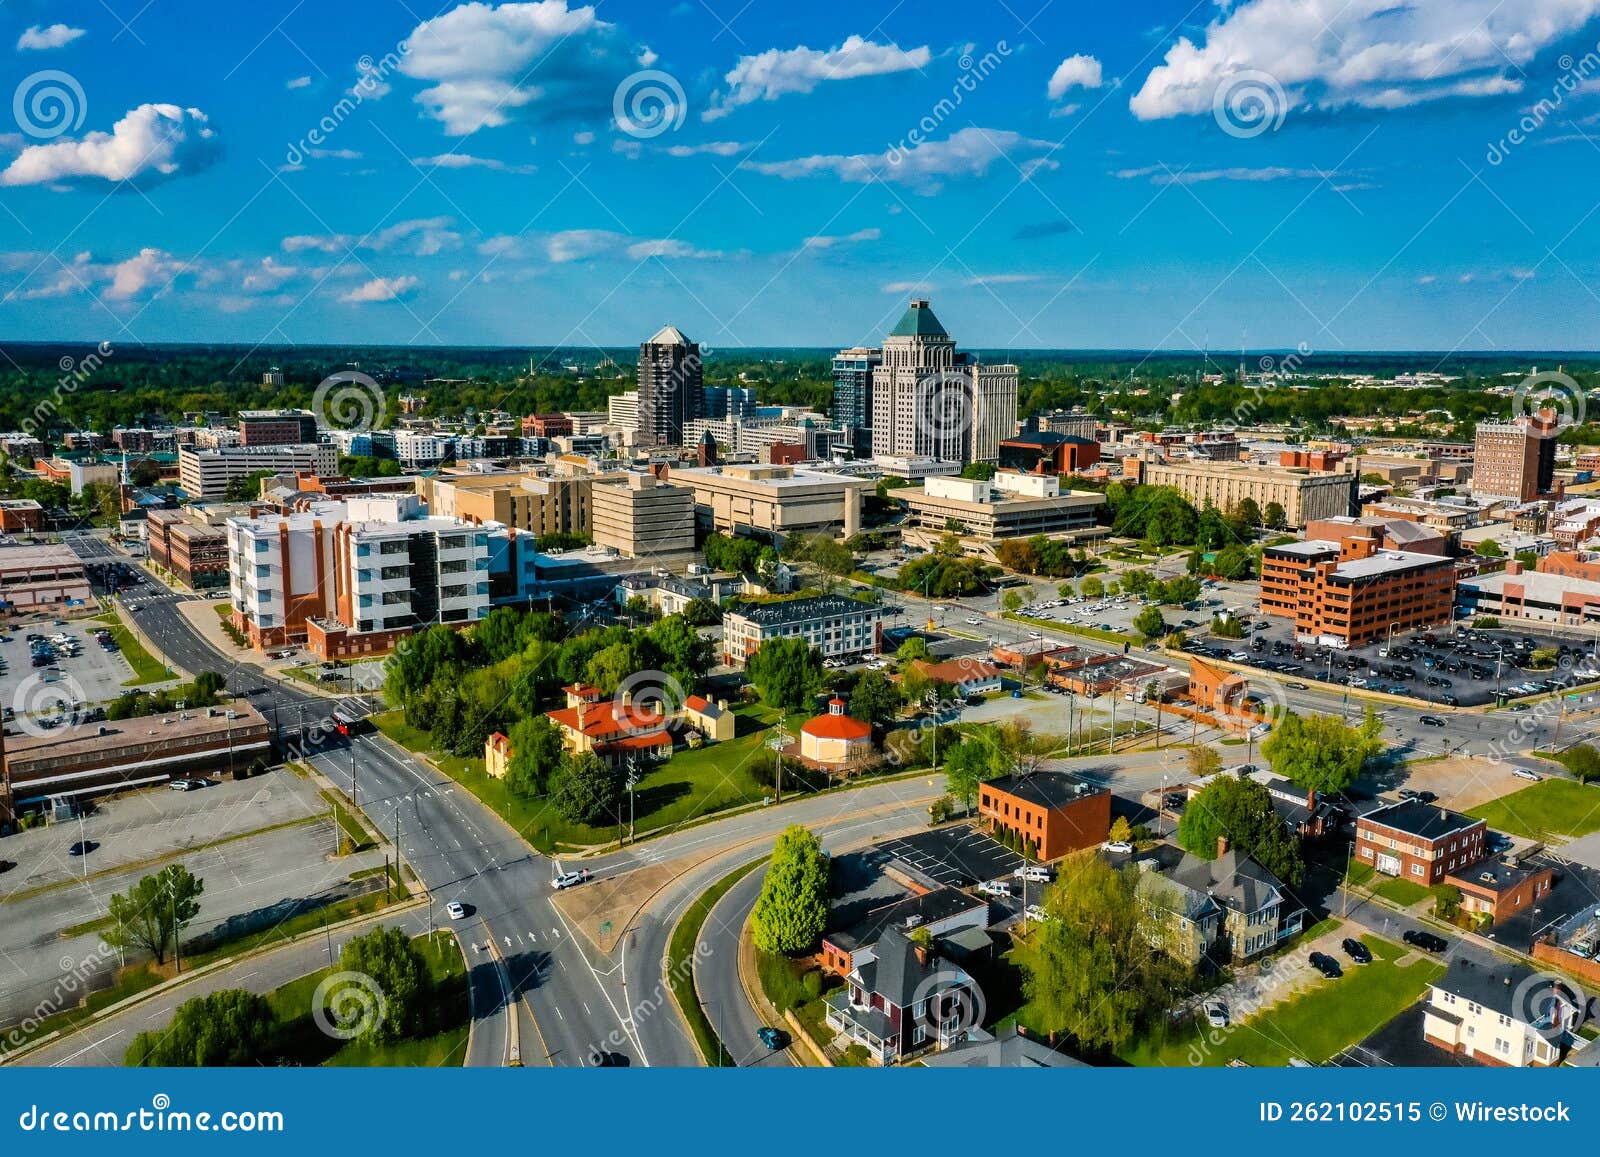 aerial shot of the city of greensboro, in north carolina during daylight